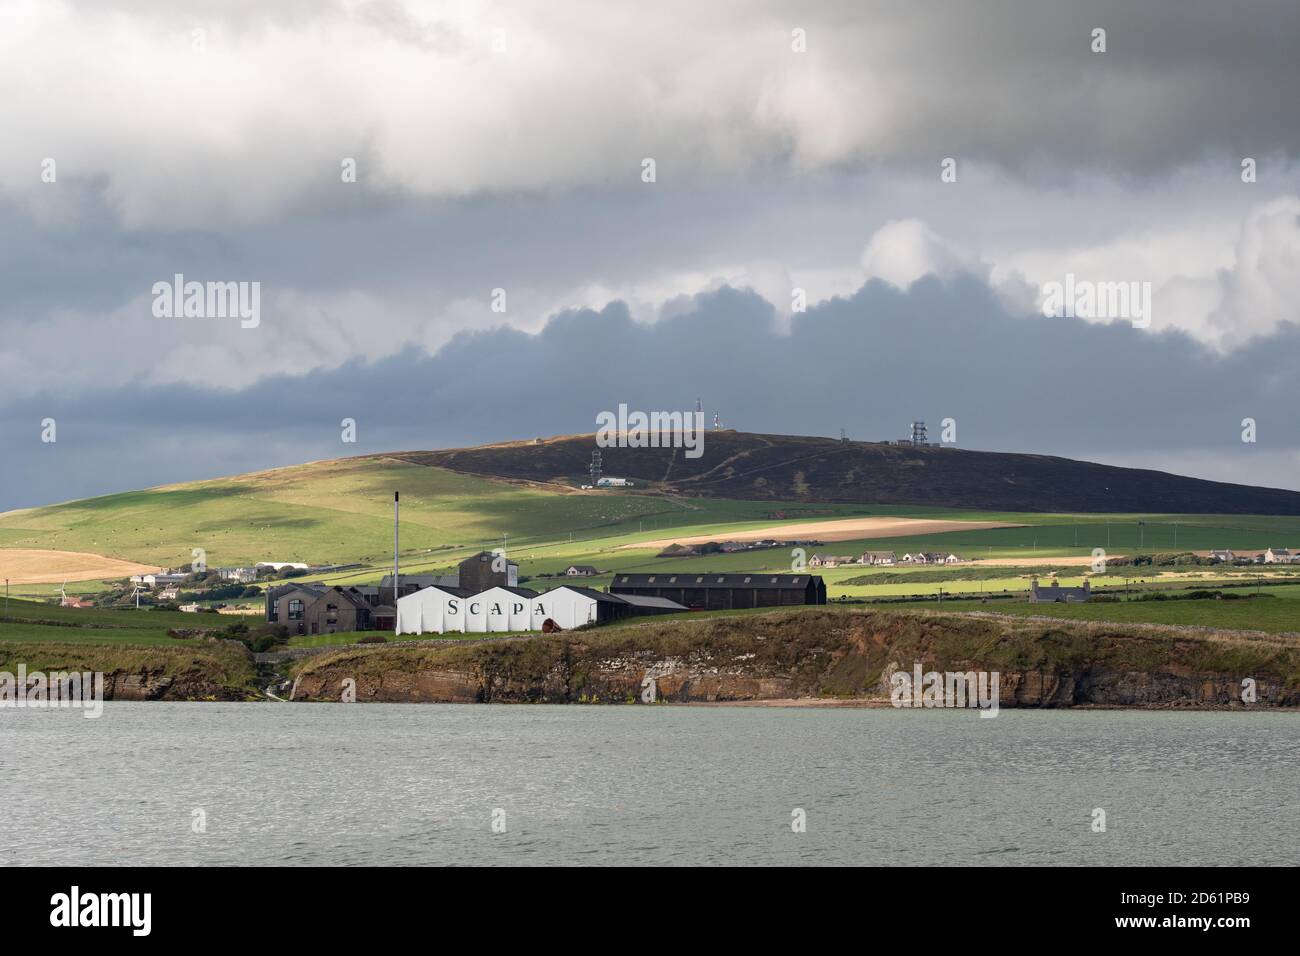 Scapa Scotch whisky distillery on the shore of Scapa Flow, St Ola, Kirkwall, The Mainland, Orkney, Scotland, UK Stock Photo